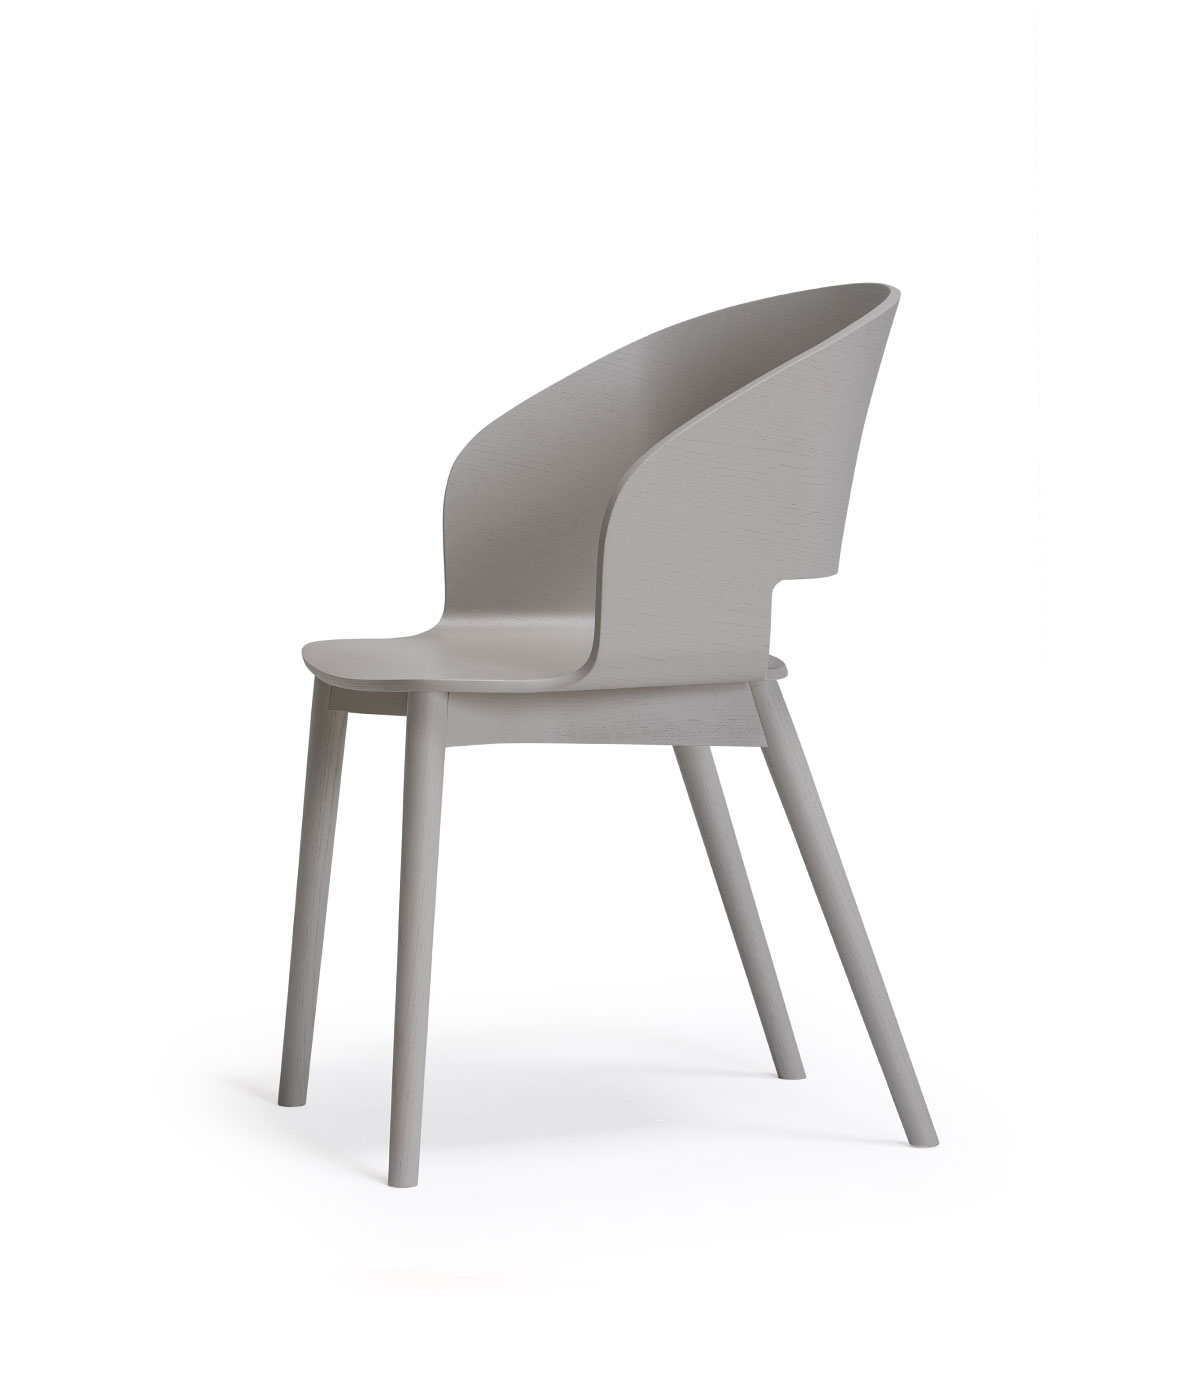 Goose chair Model A with wooden armrests and legs - Vergés